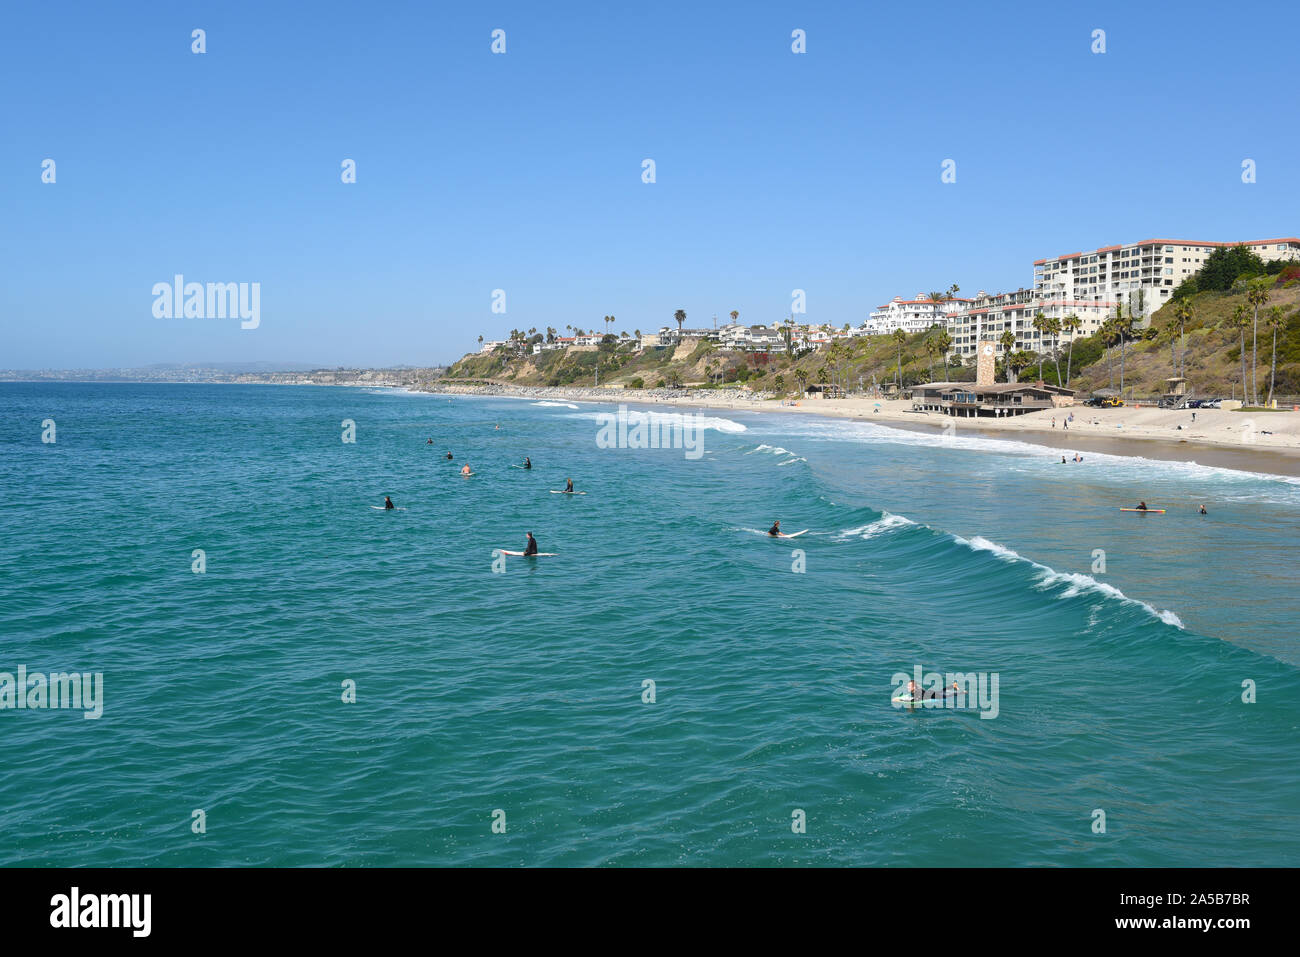 SAN CLEMENTE, CALIFORNIA - 18 OCT 2019: The beach and coastline with surfers and sunbathers seen from the pier in the South Orange County beach town. Stock Photo